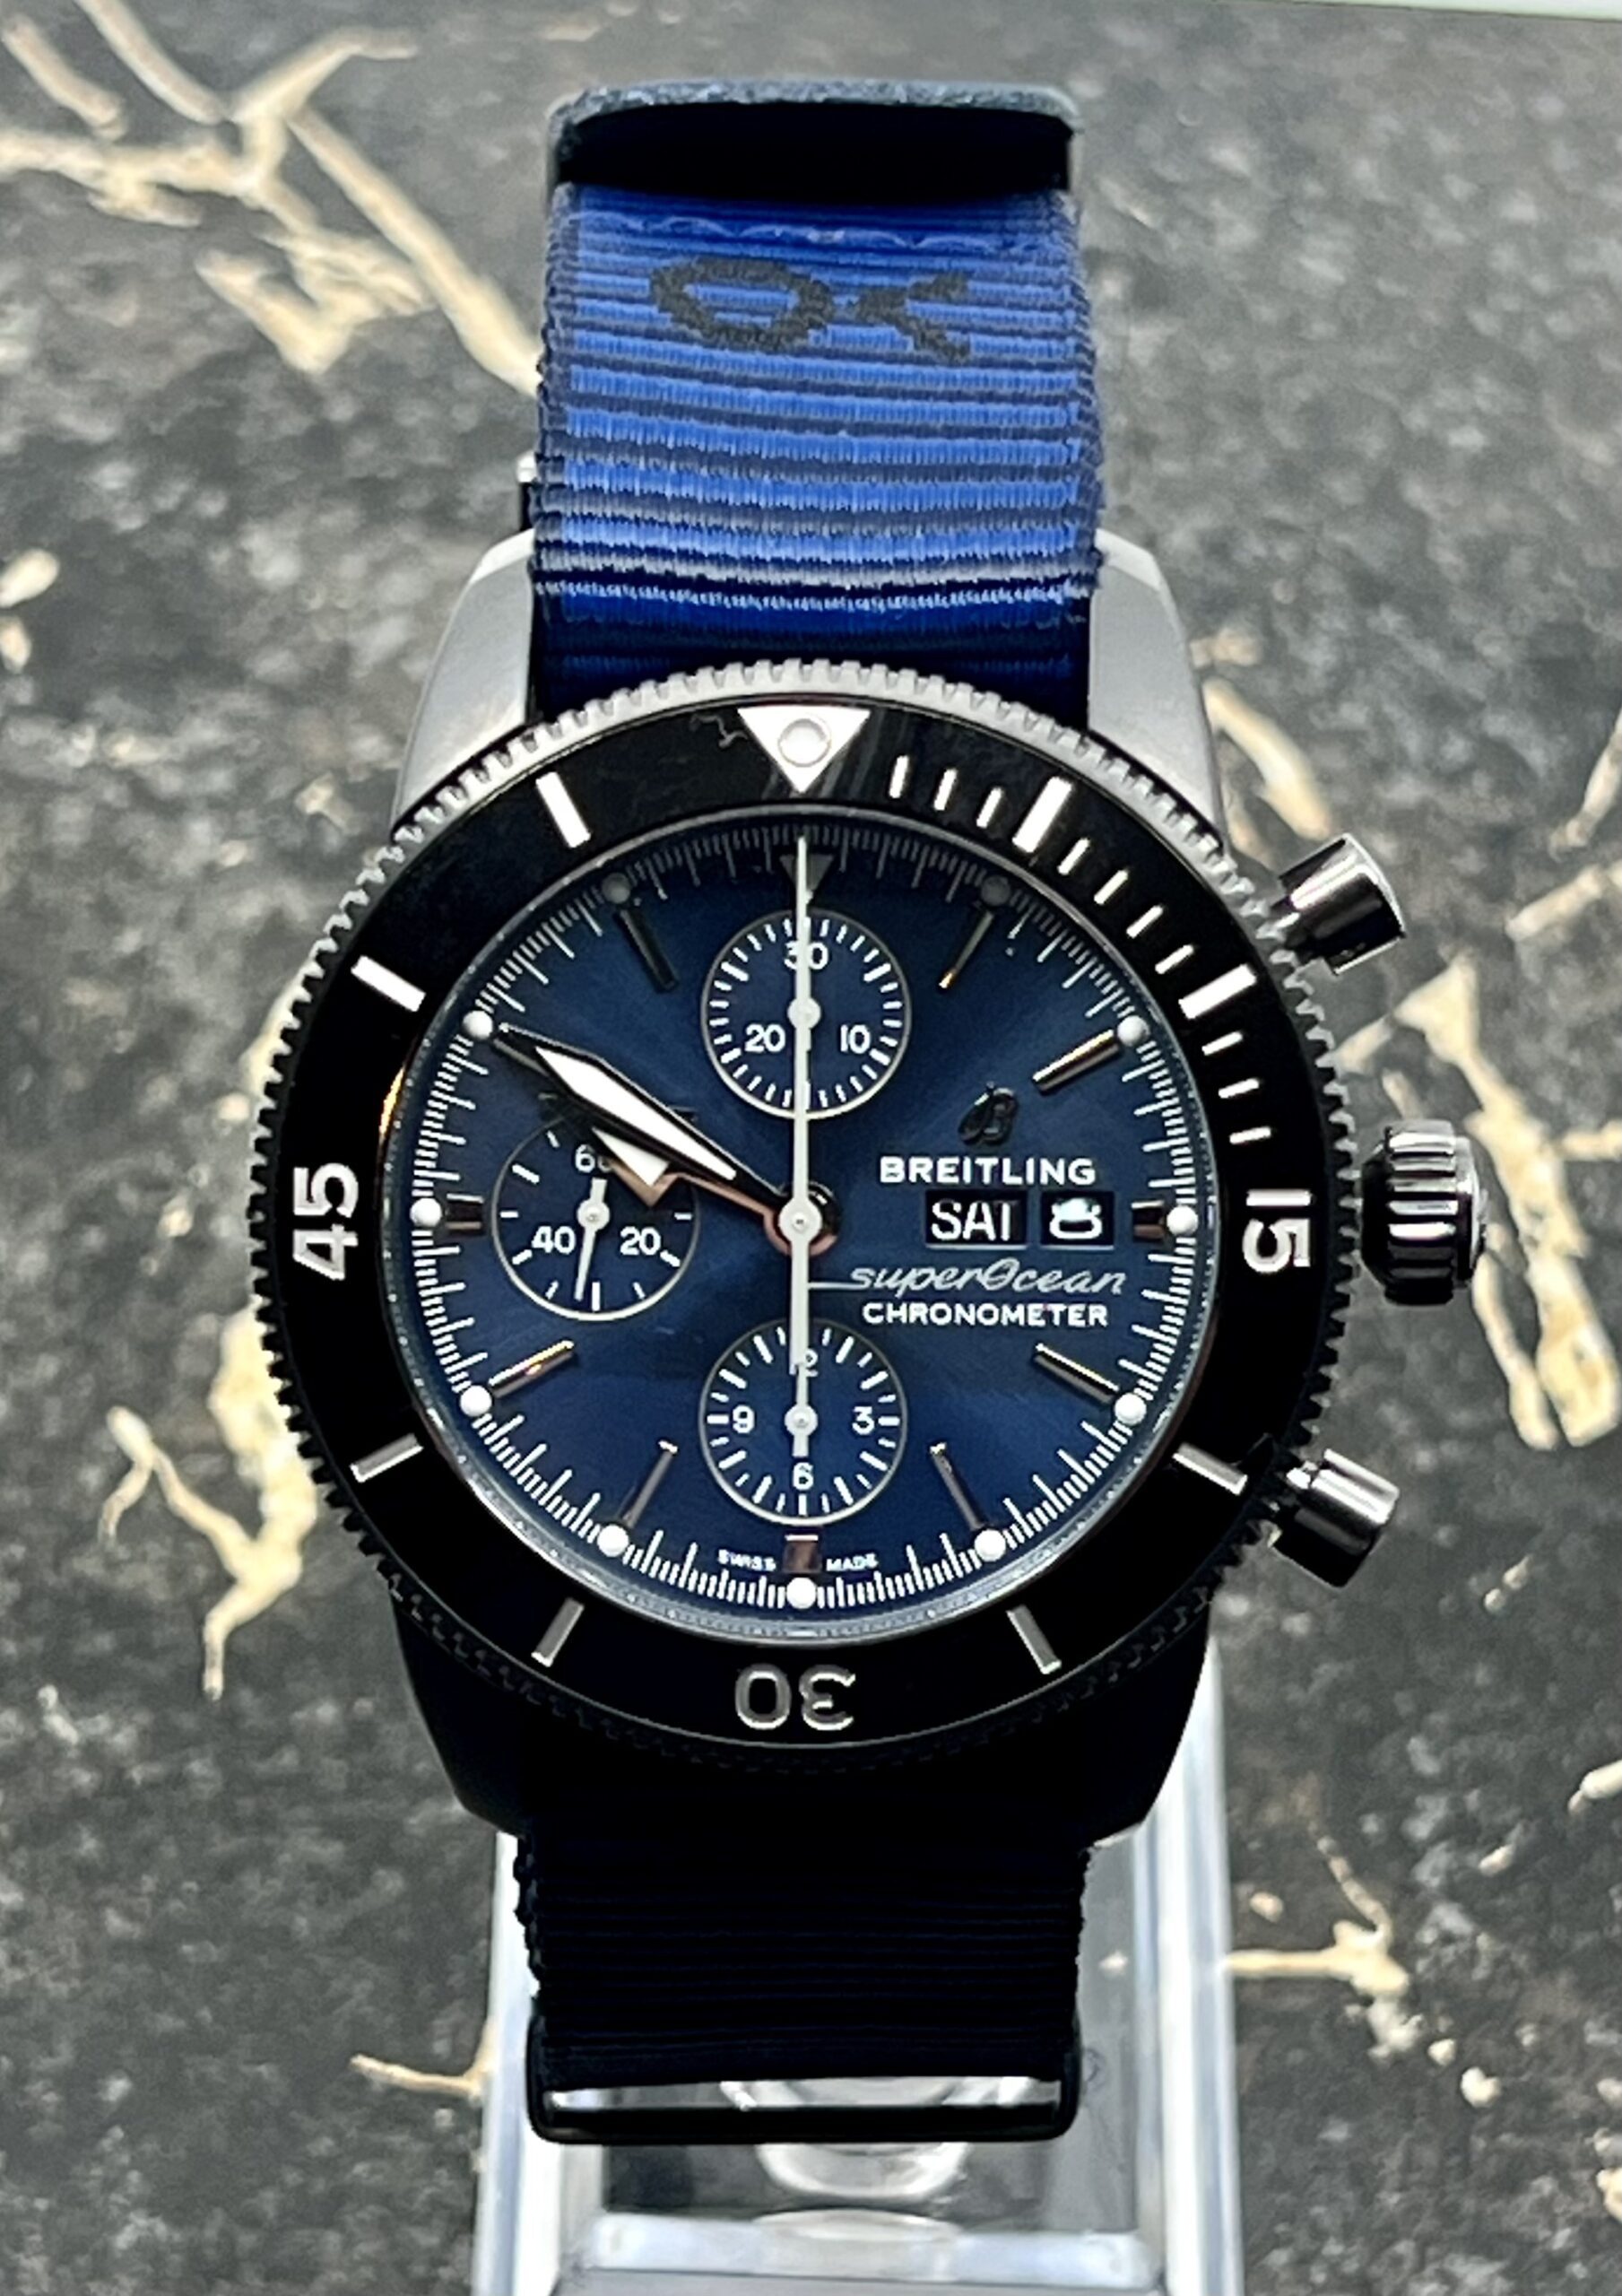 Breitling Superocean Heritage Chronograph 44mm Outerknown - Fabric